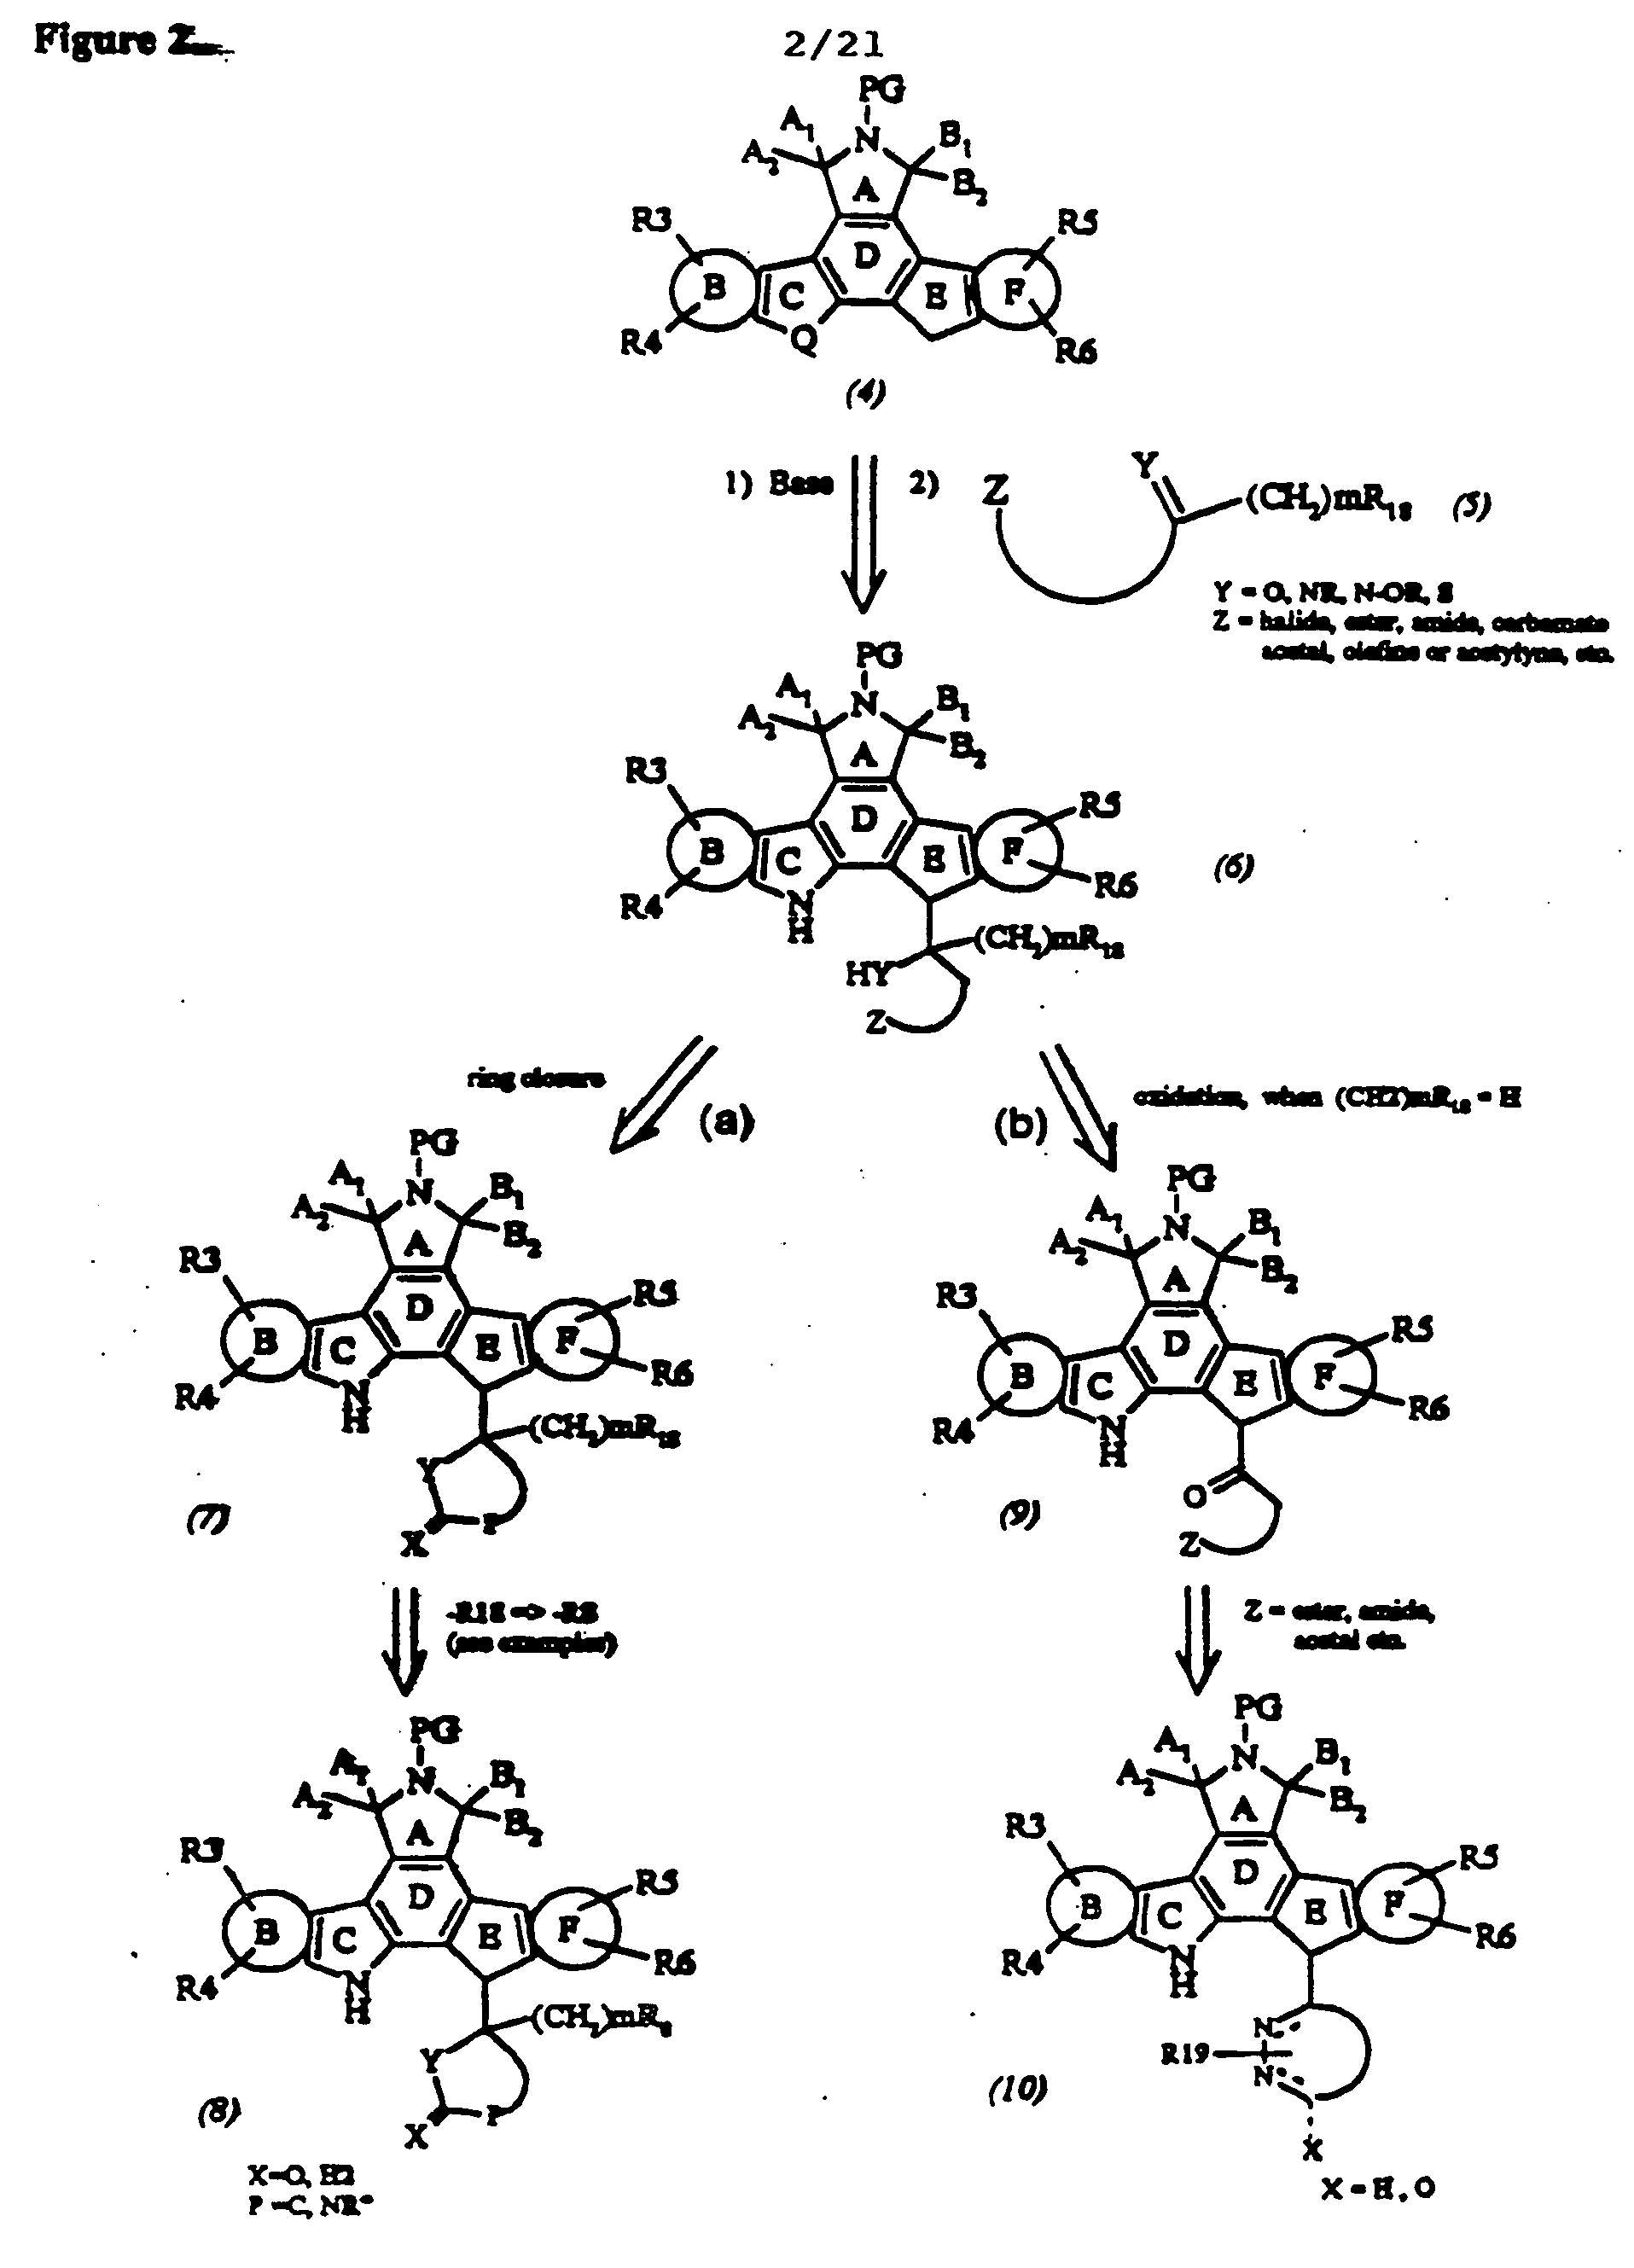 Cyclic substituted fused pyrrolocarbazoles and isoindolones